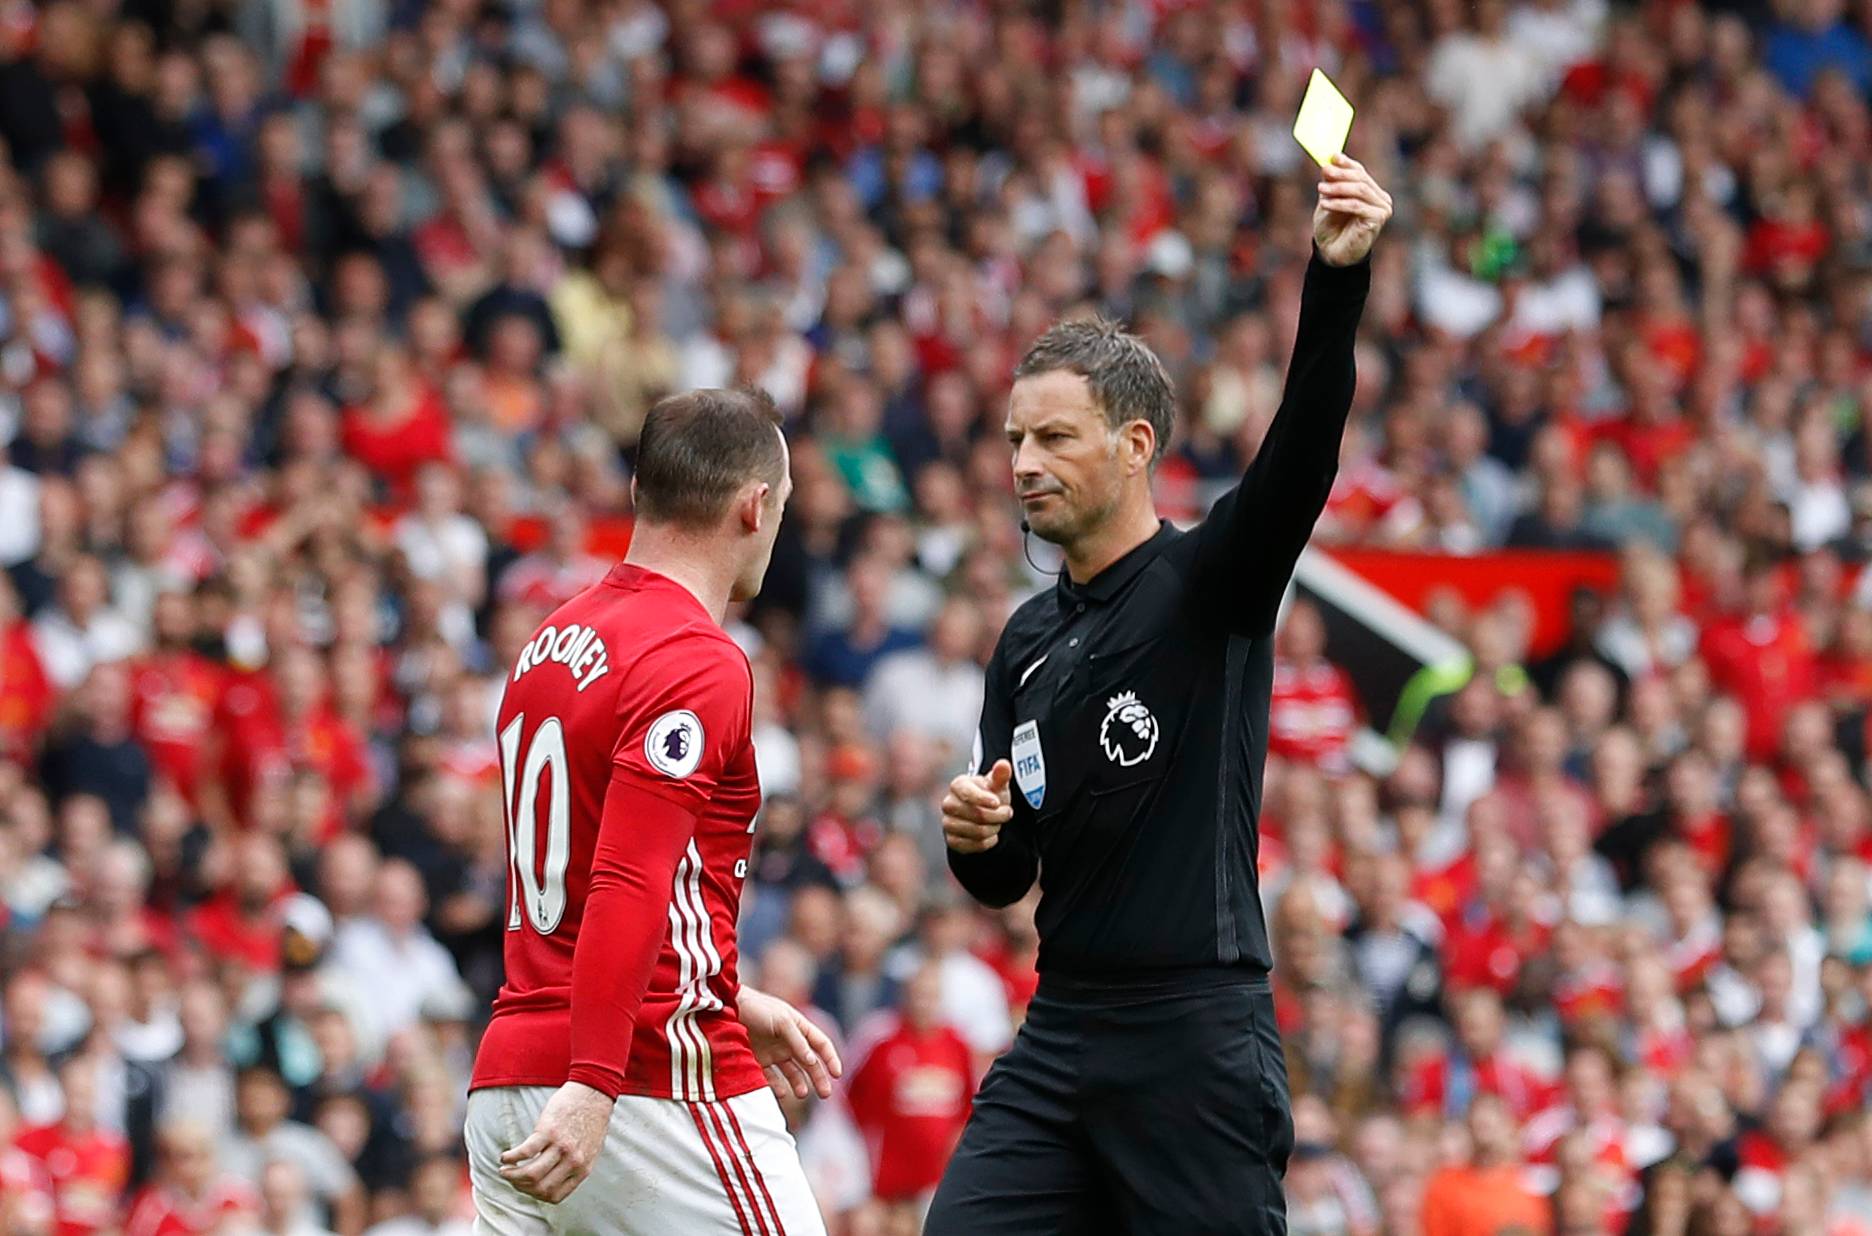 Manchester United's Wayne Rooney receives a booking